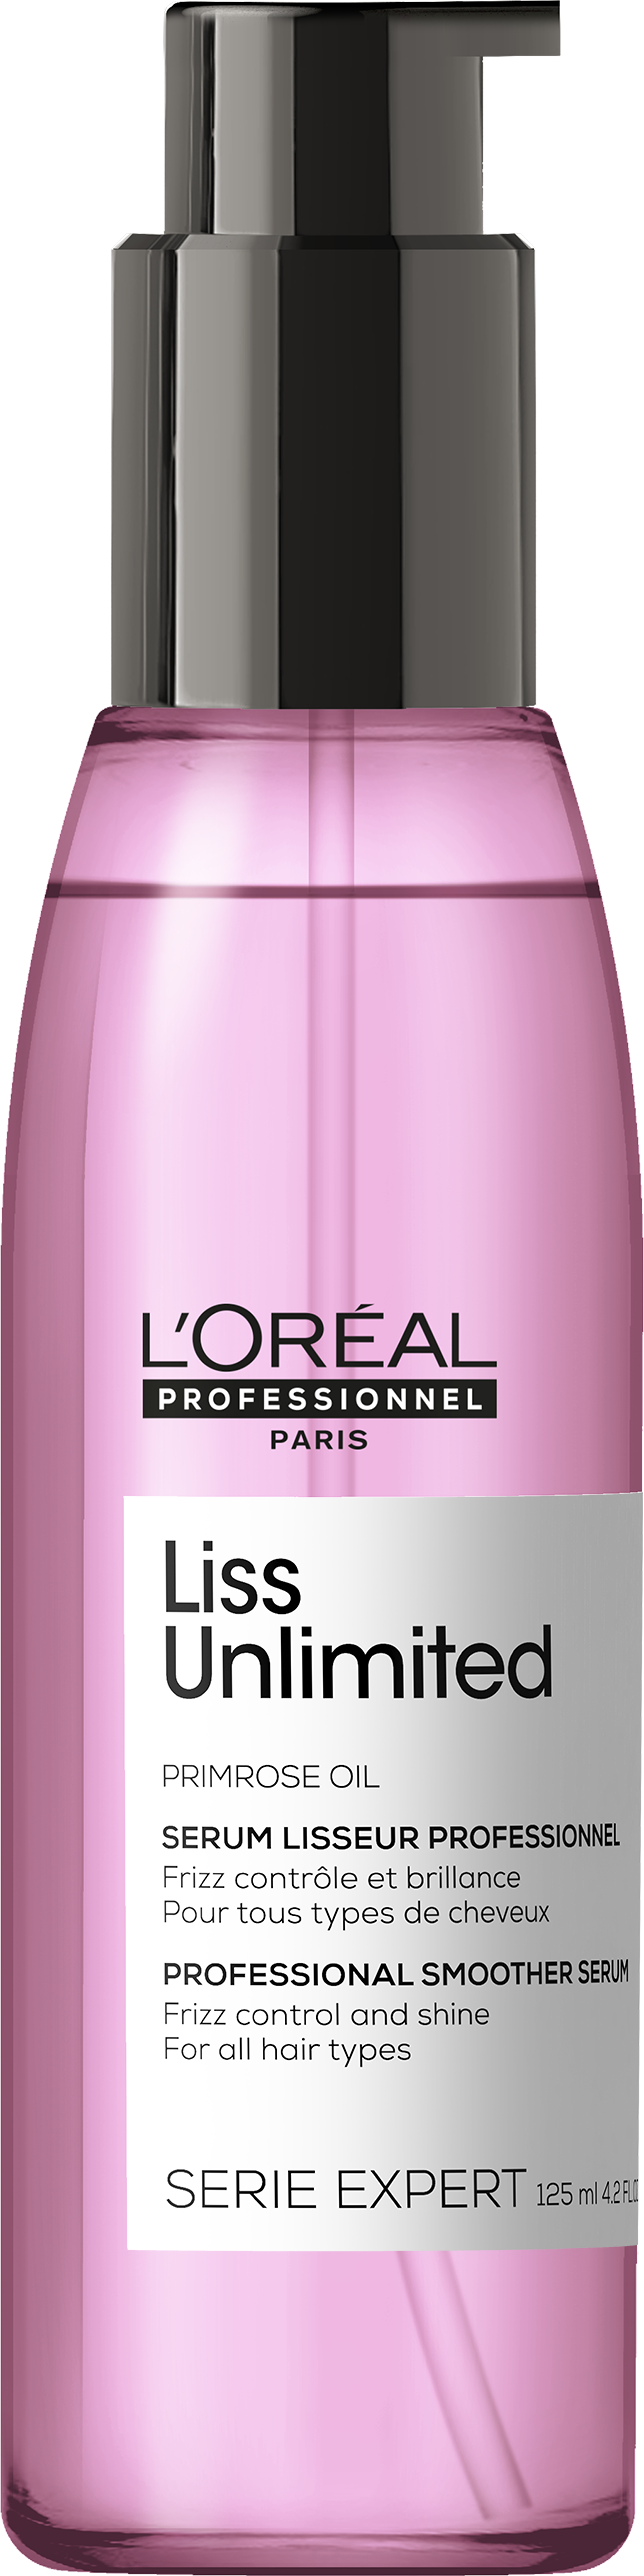 L'OREAL LISS UNLIMITED BLOW-DRY OIL 125ML